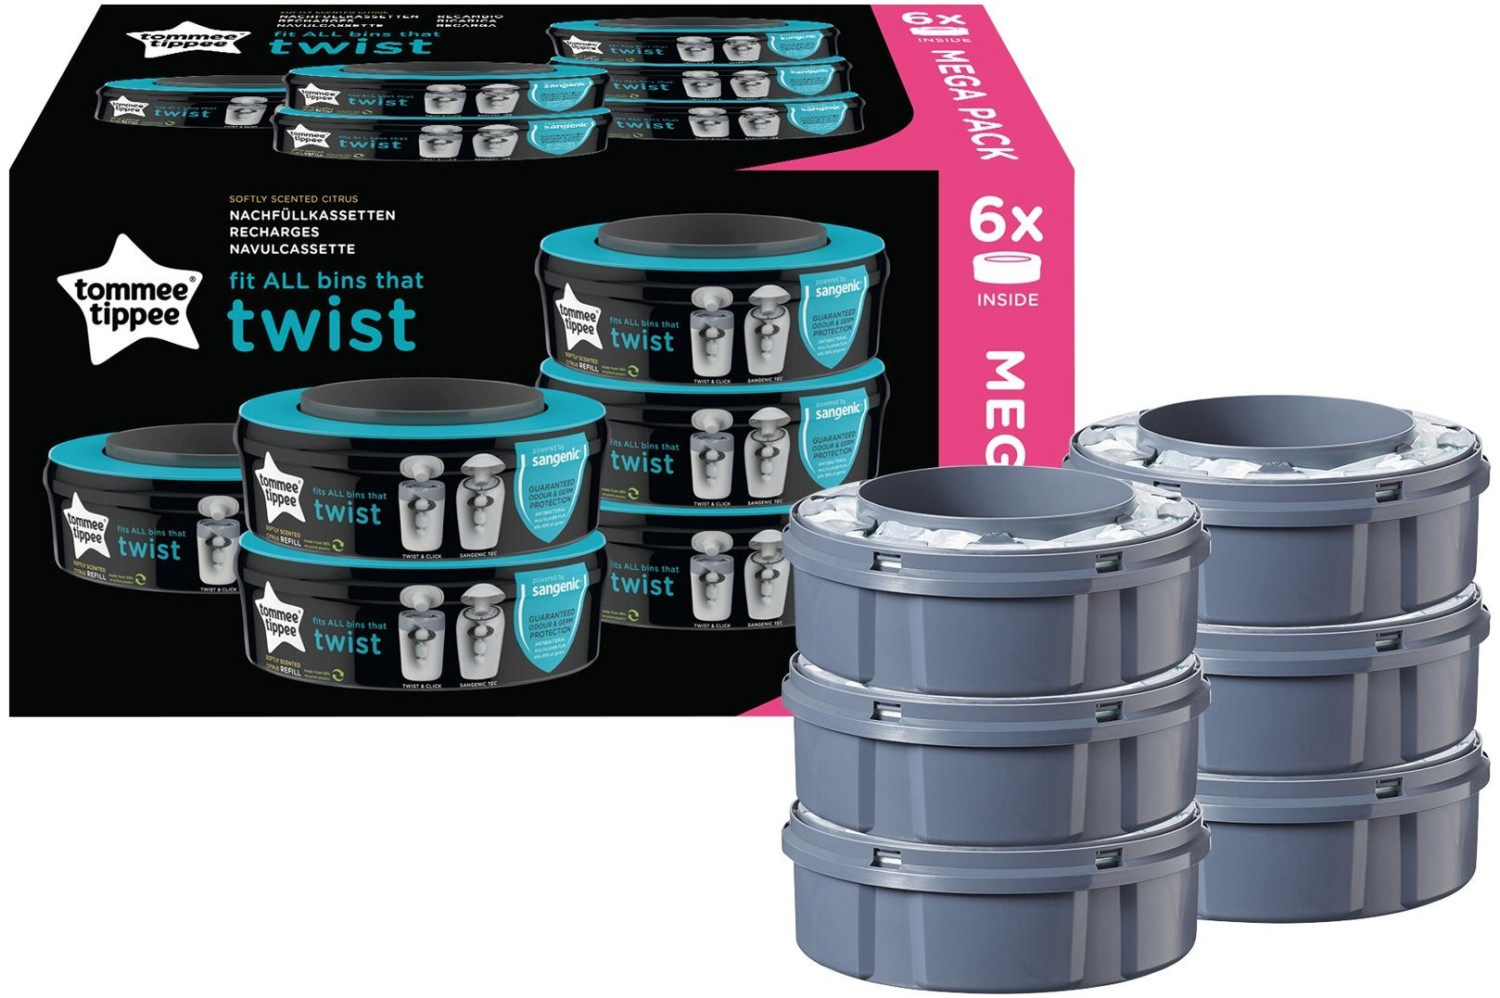 10 Recambios Compatibles con Tommee Tippee Twist & Click Sangenic